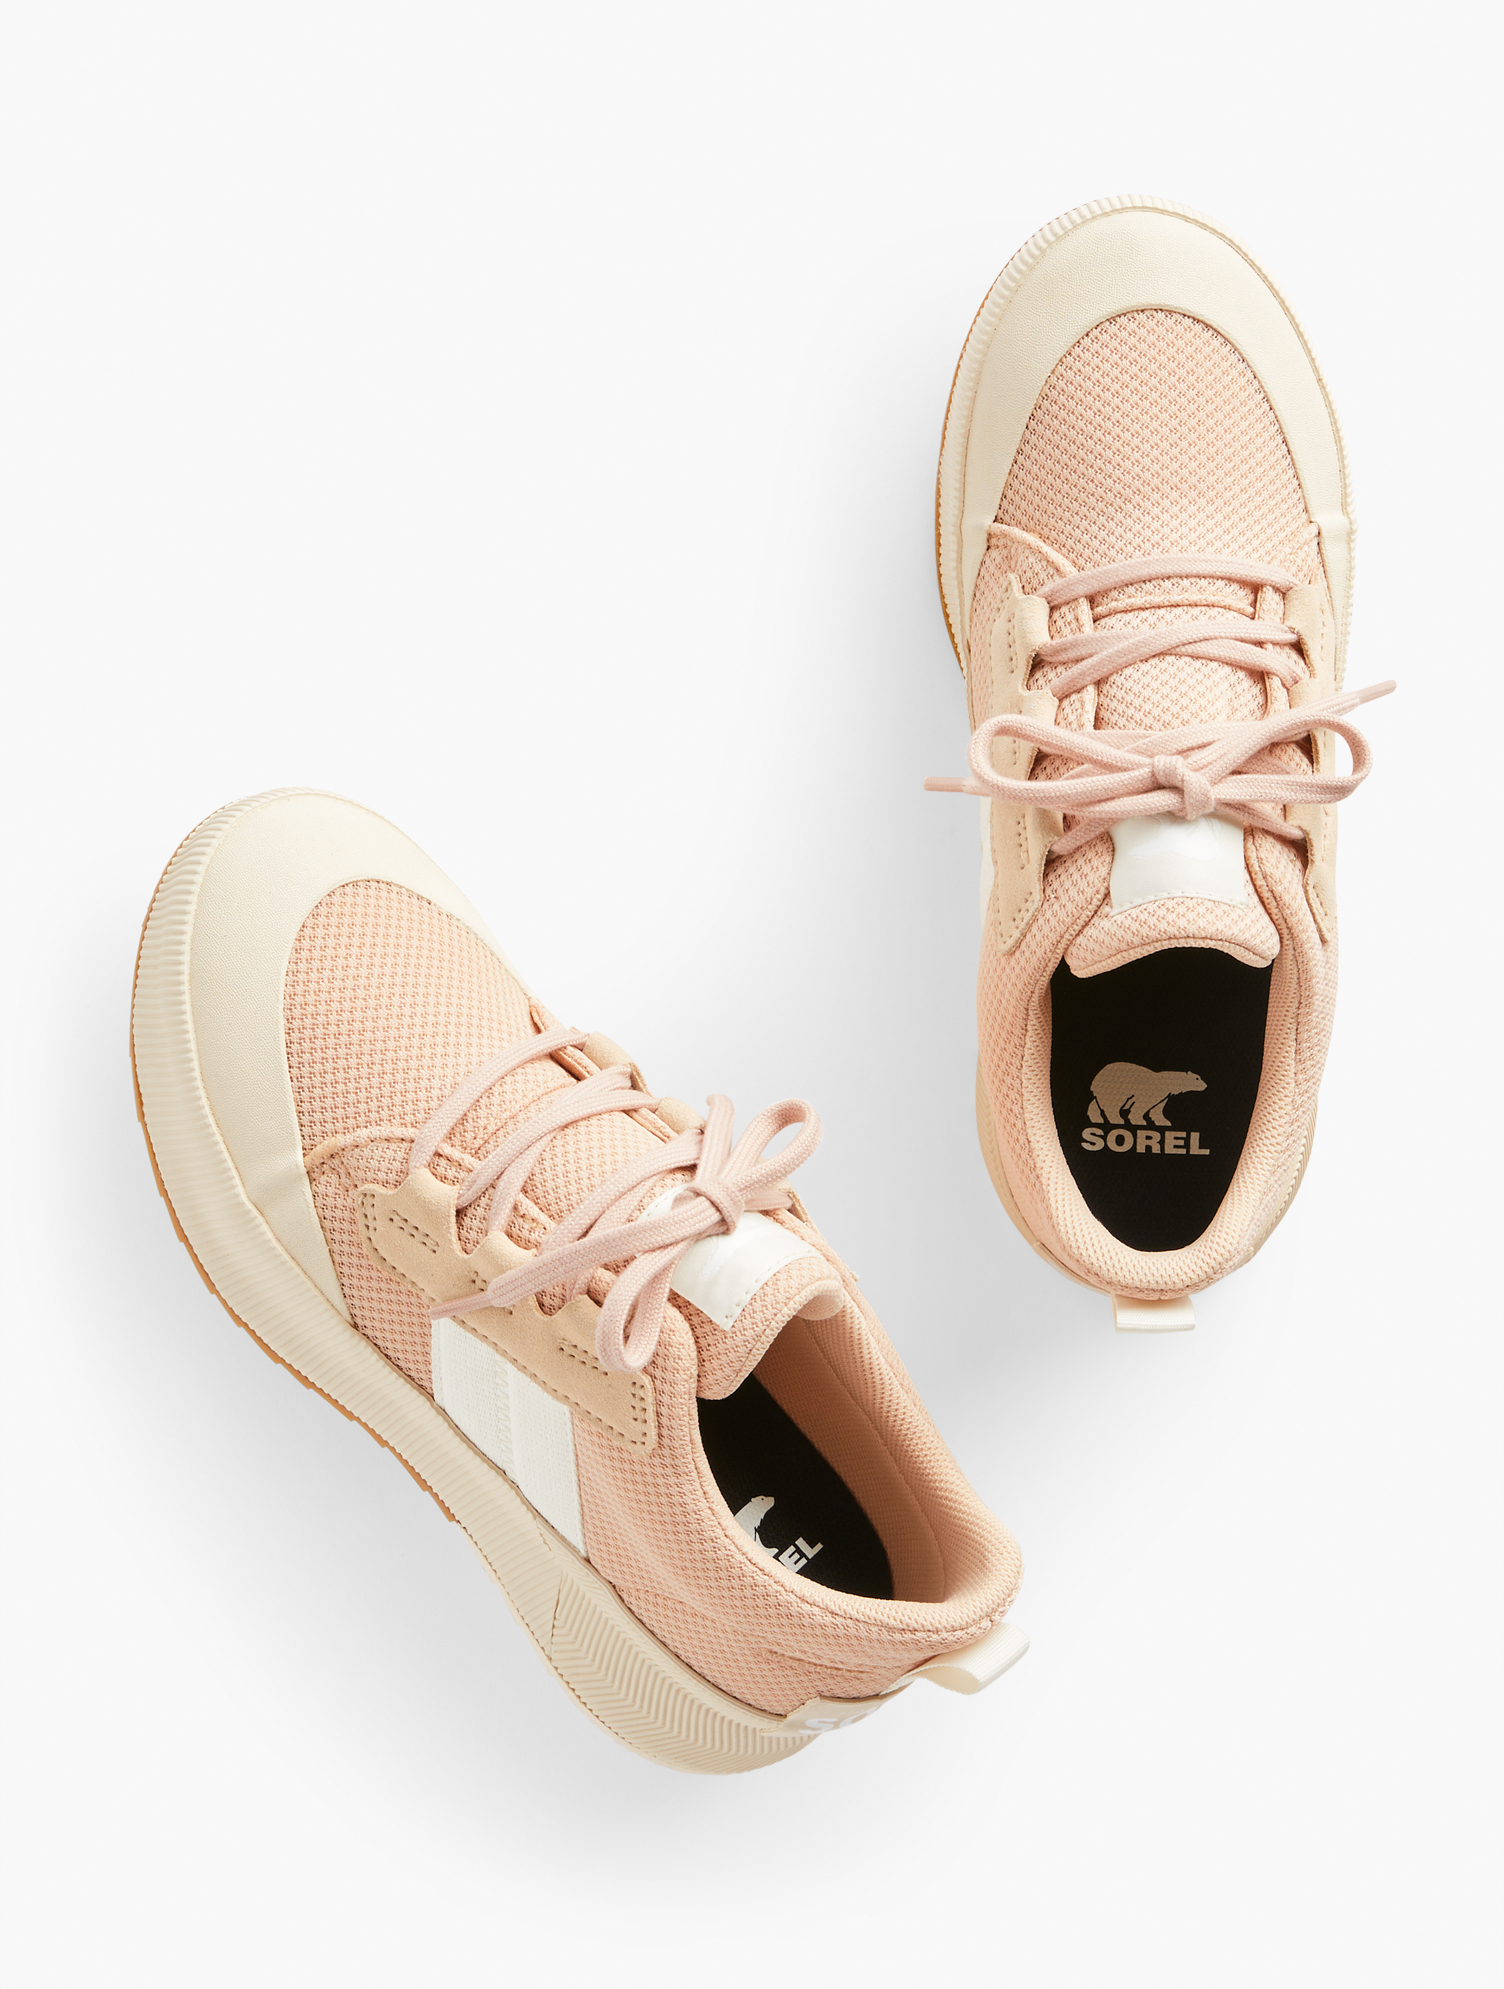 Talbots Out N Aboutâ¢ Waterproof Sneakers - Nova Sand/chalk - 11m  In Nova Sand,chalk